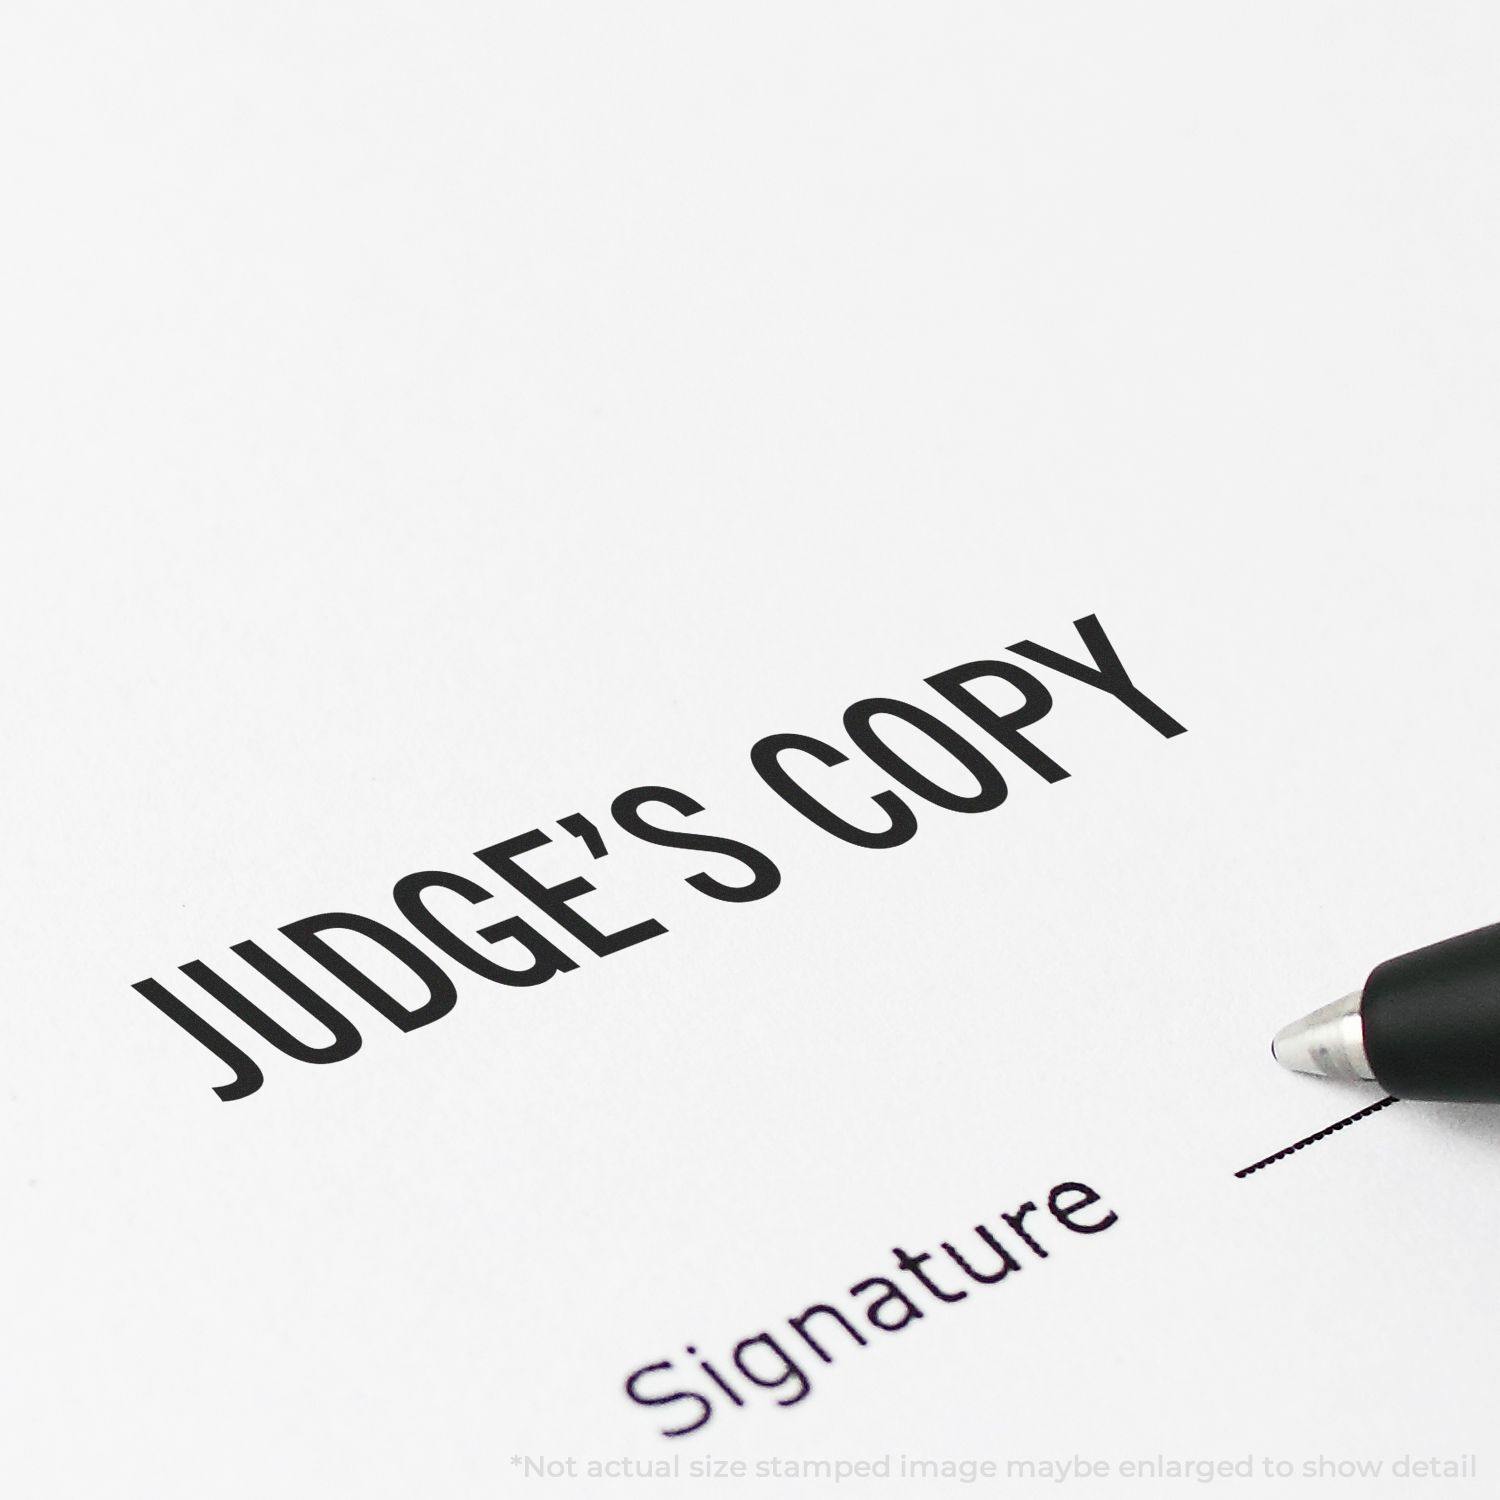 A stock office rubber stamp with a stamped image showing how the text "JUDGE'S COPY" in a large font is displayed after stamping.